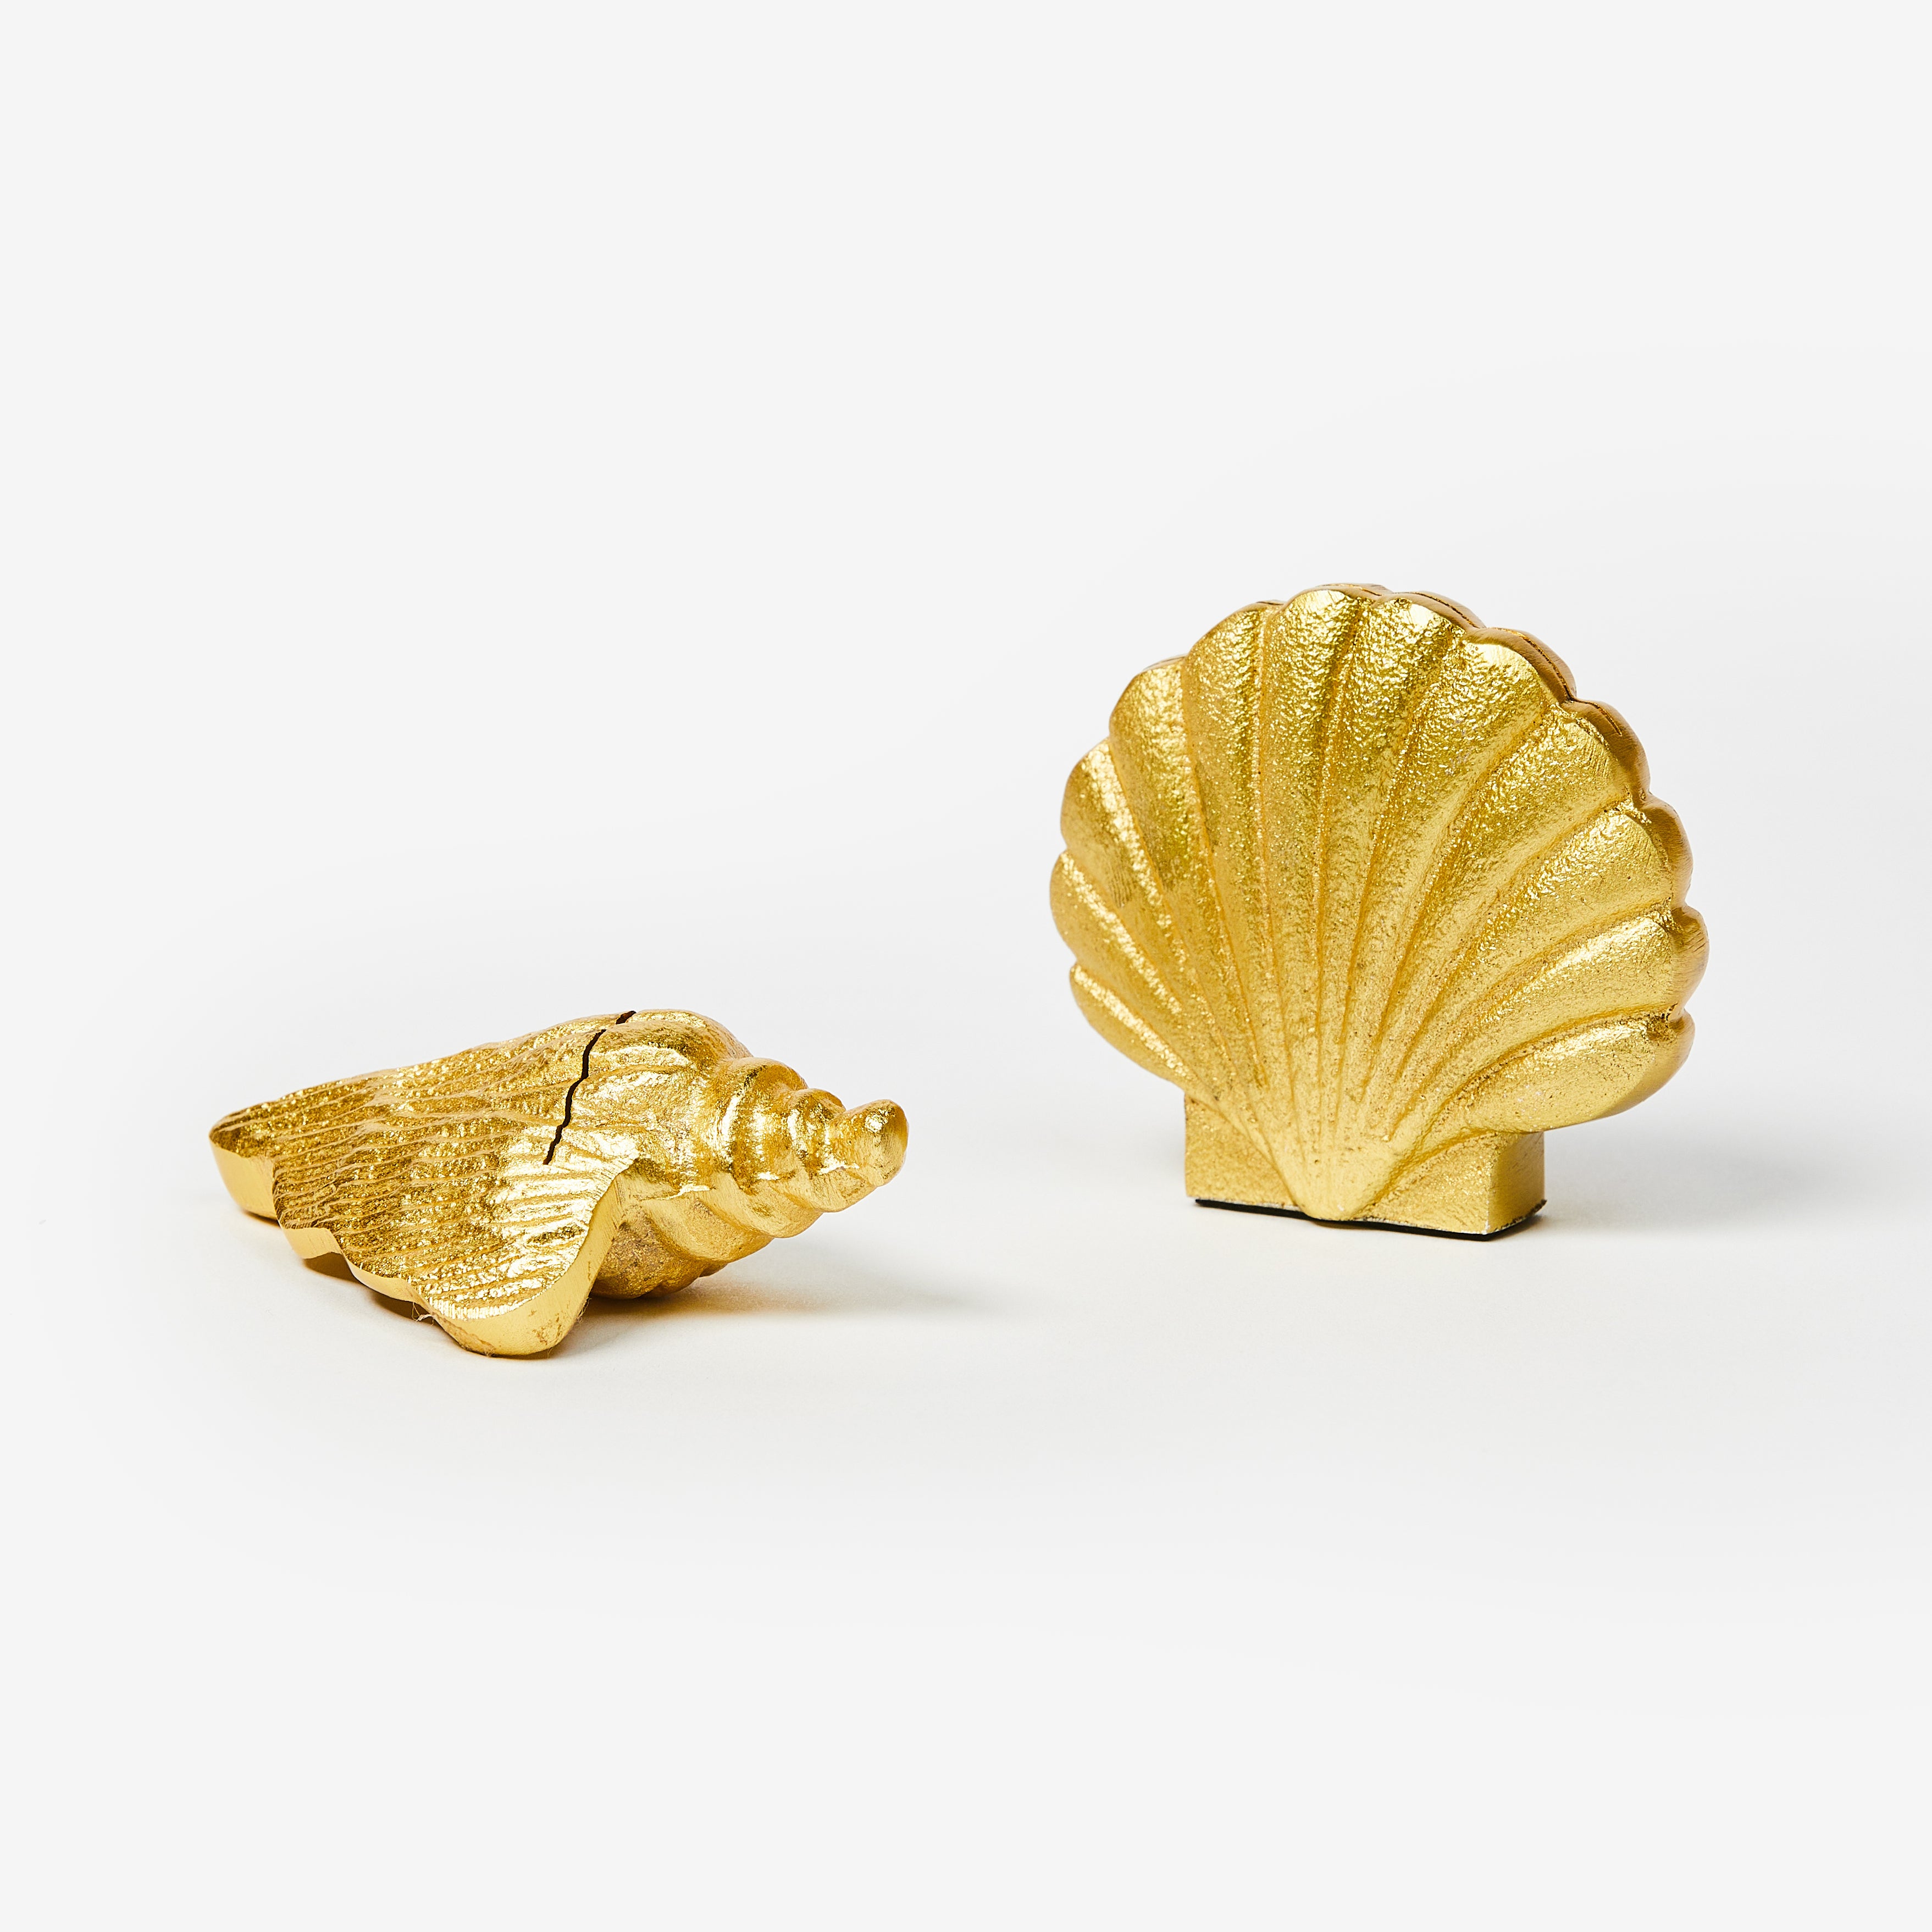 Clam Shell Place Card Holder